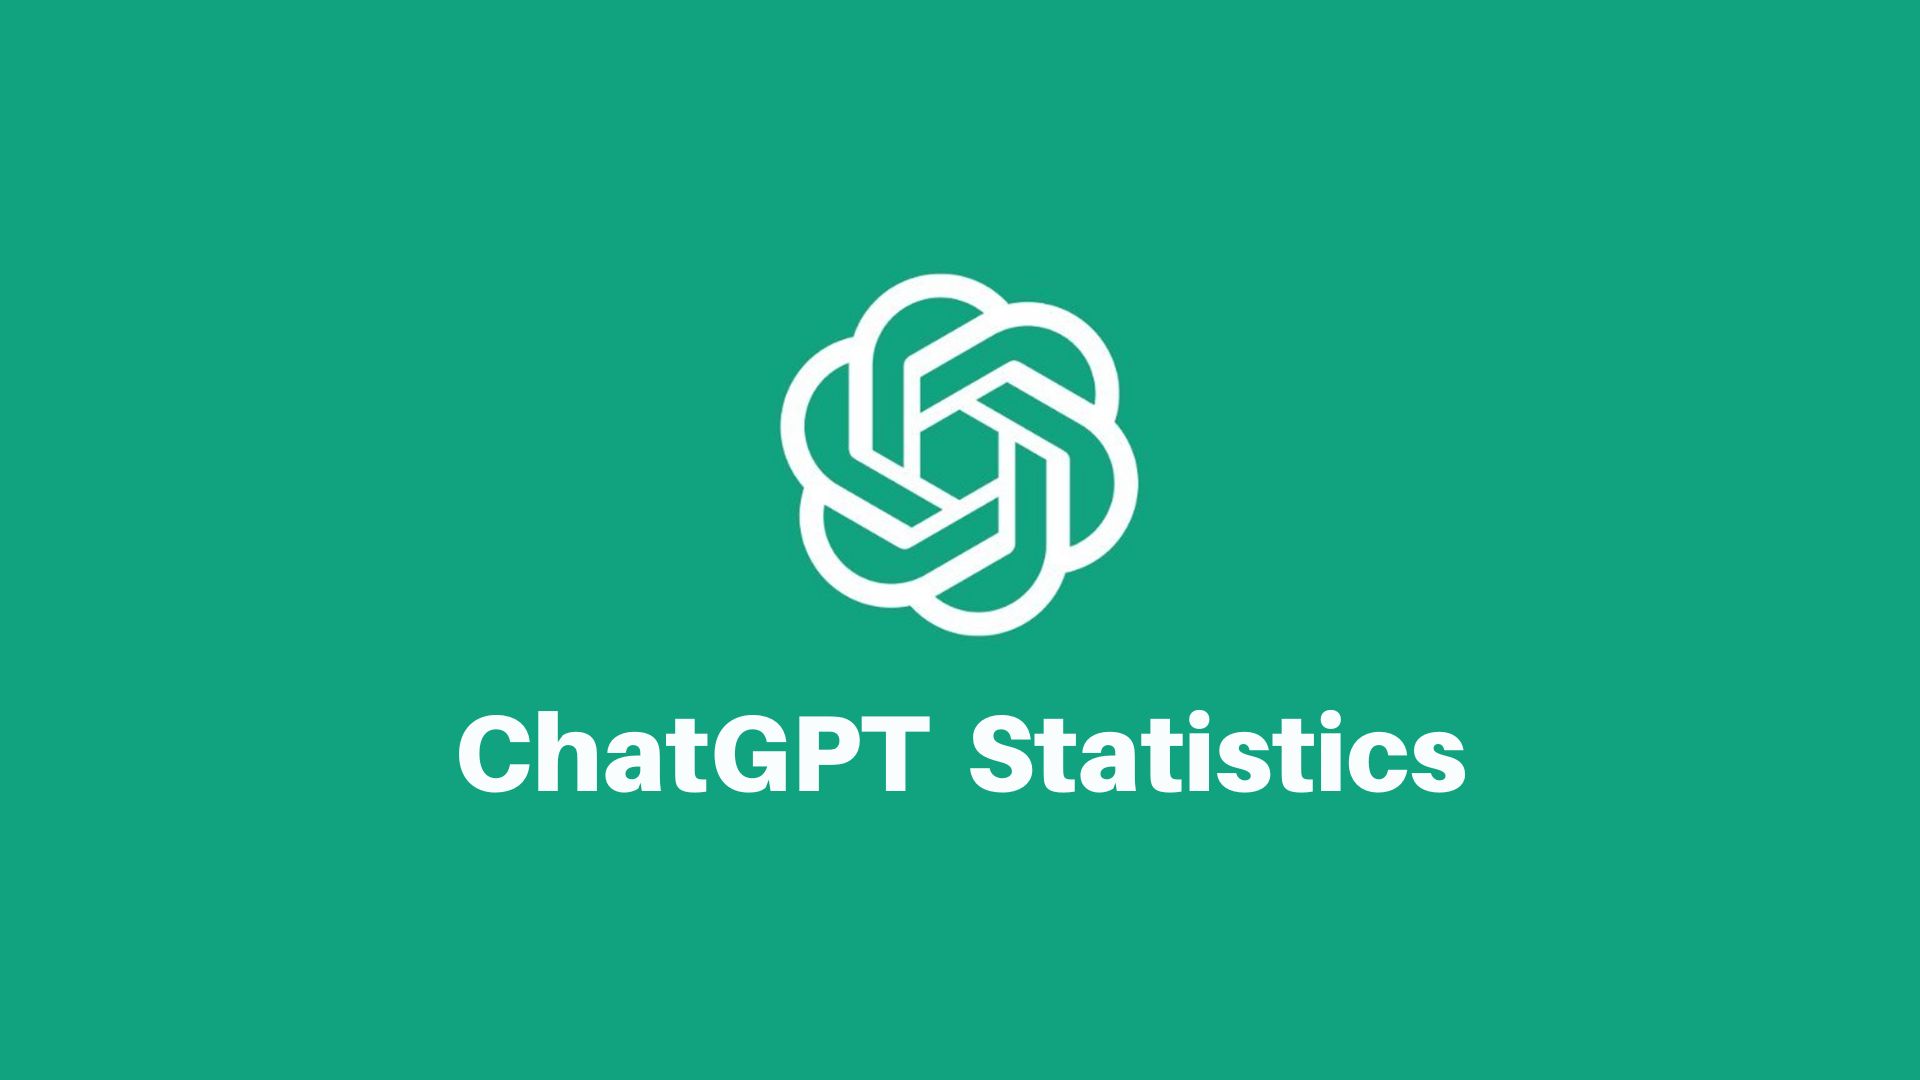 ChatGPT Statistics – Users, Revenue and Funding